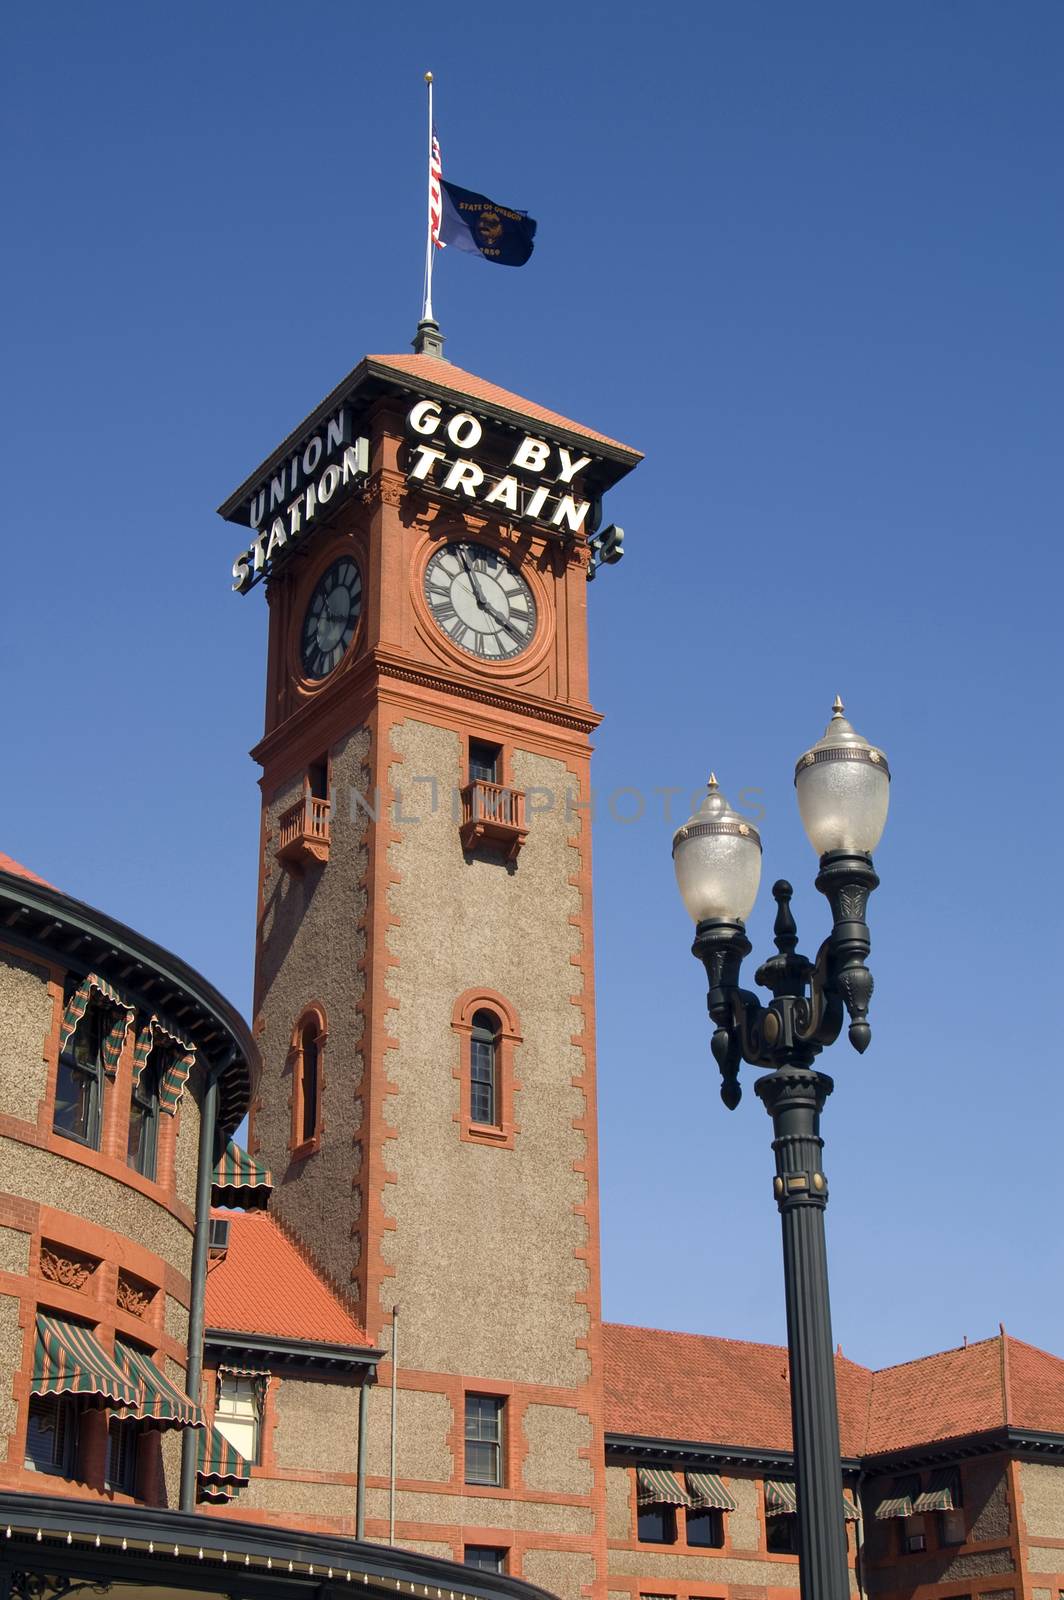 Union Station Portland Oregon Downtown Train Depot Clock Tower by ChrisBoswell